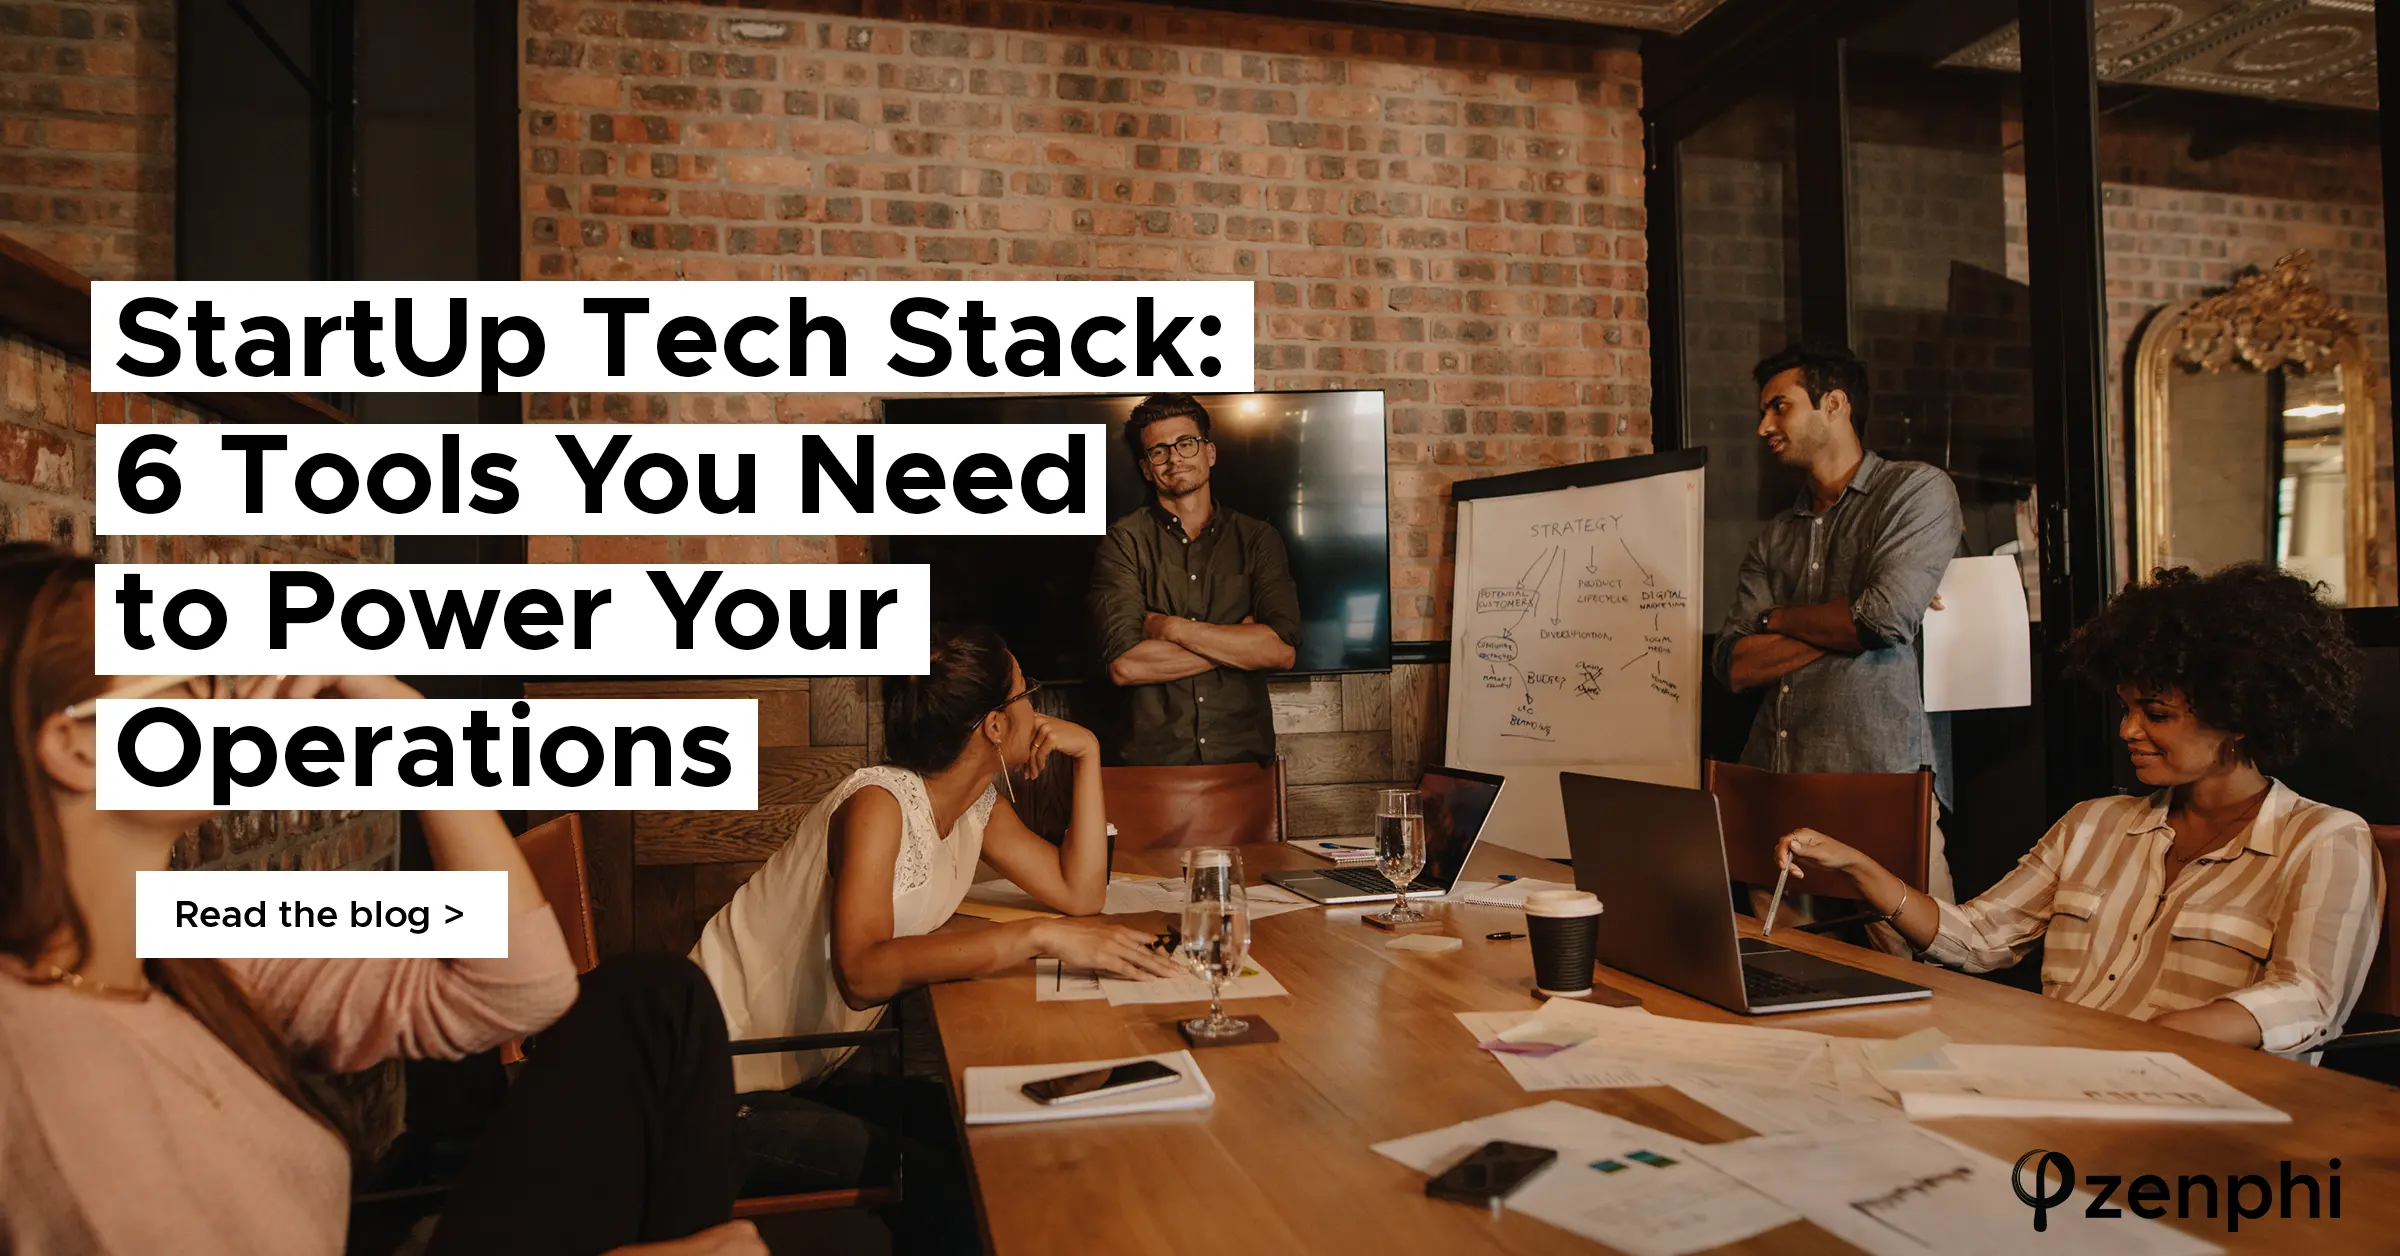 StartUp Tech Stack